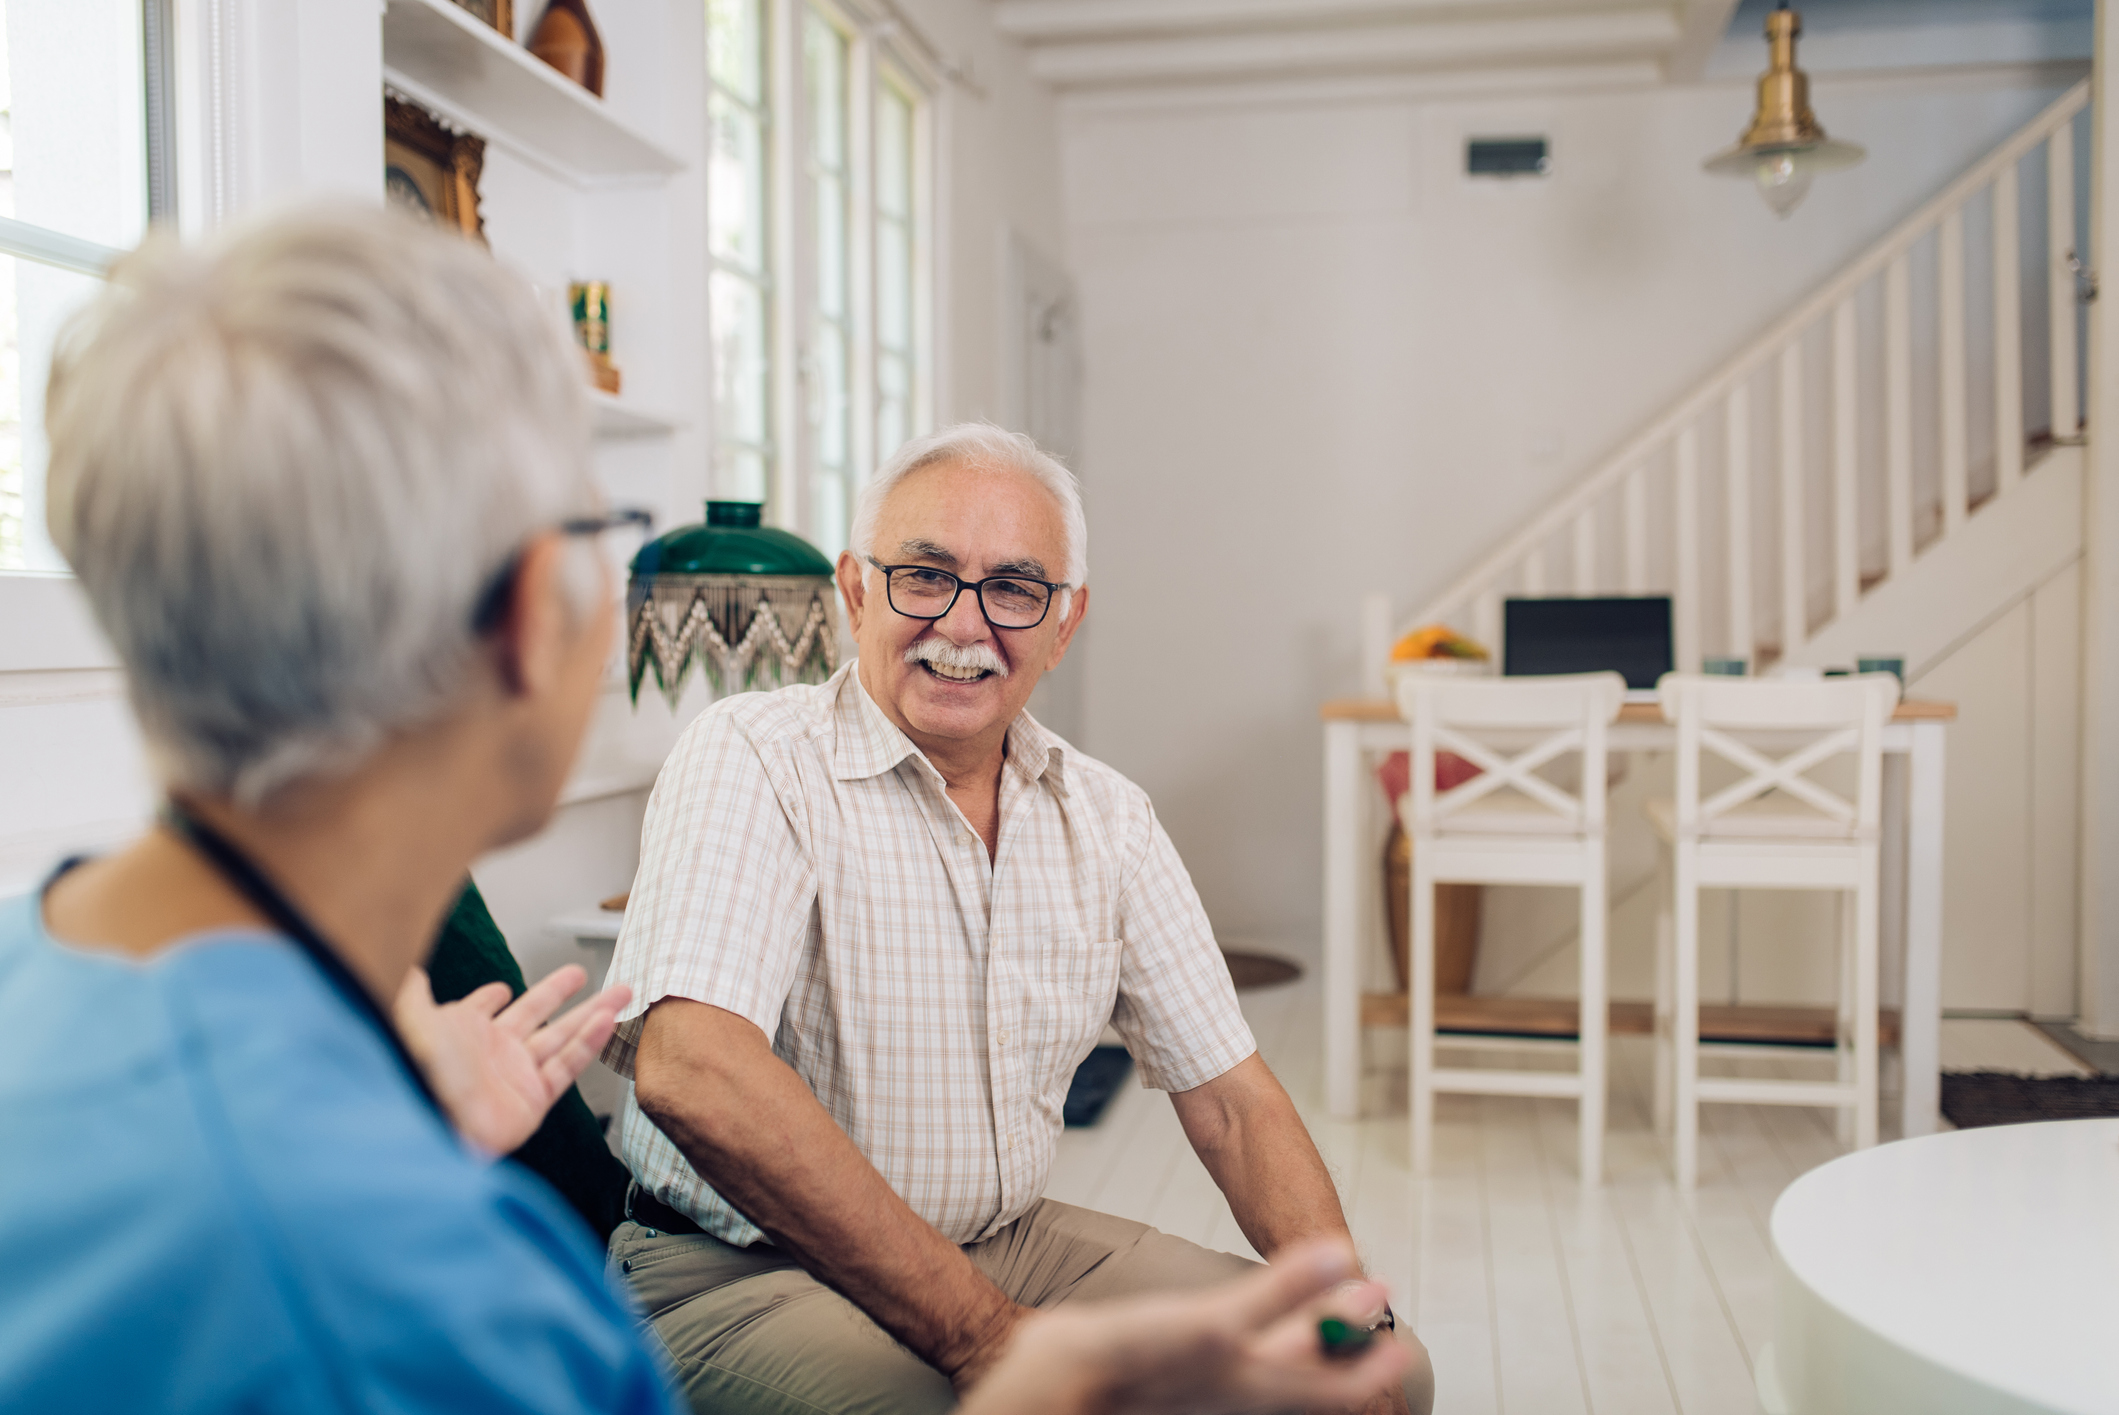 For home care guidance, families can benefit from a professional in-home consultation.